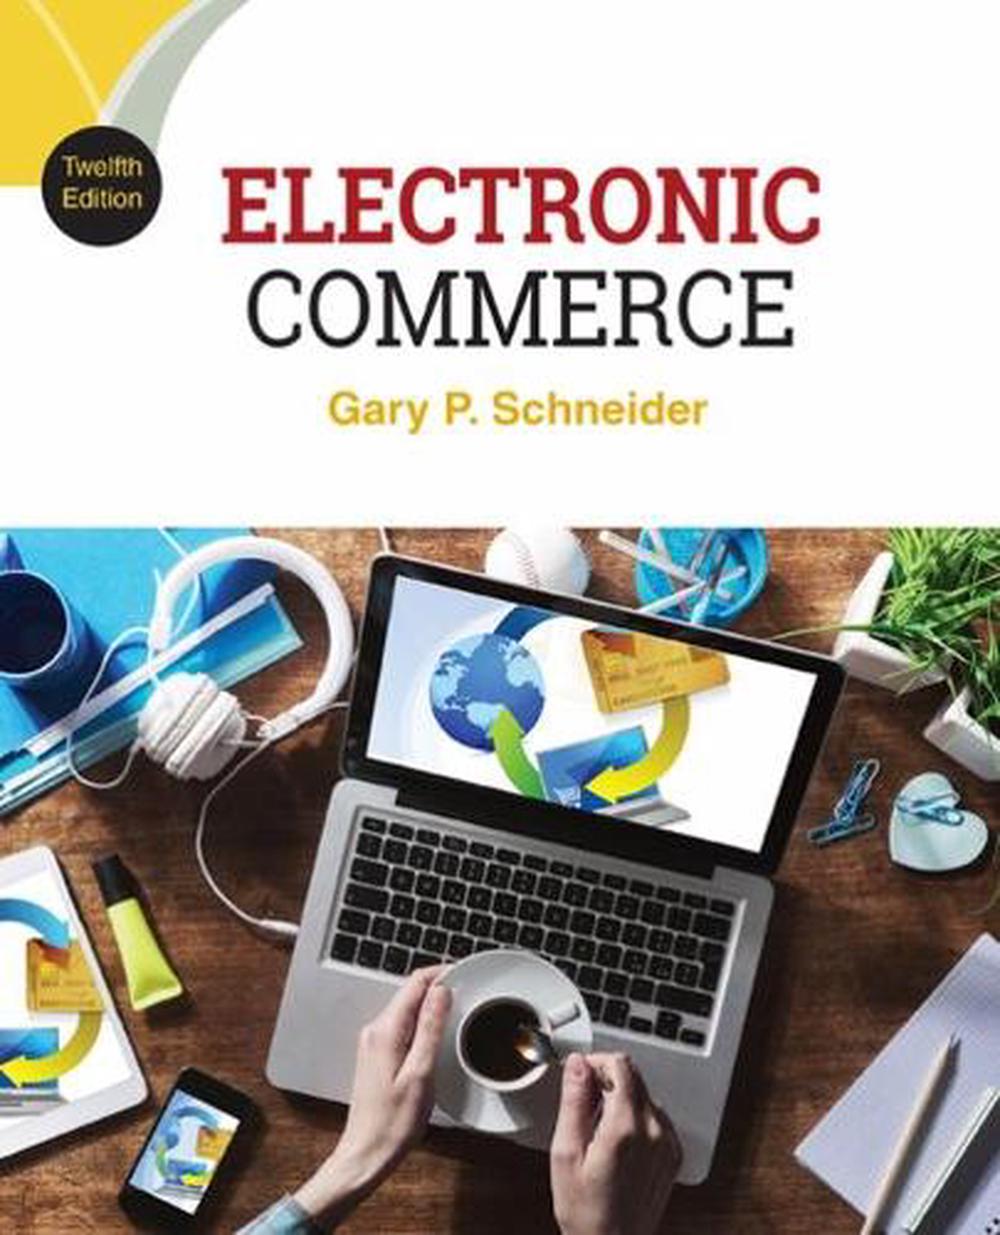 by　Nile　Gary　Buy　Electronic　Paperback,　9781305867819　online　at　Commerce,　12th　Schneider,　Edition　The